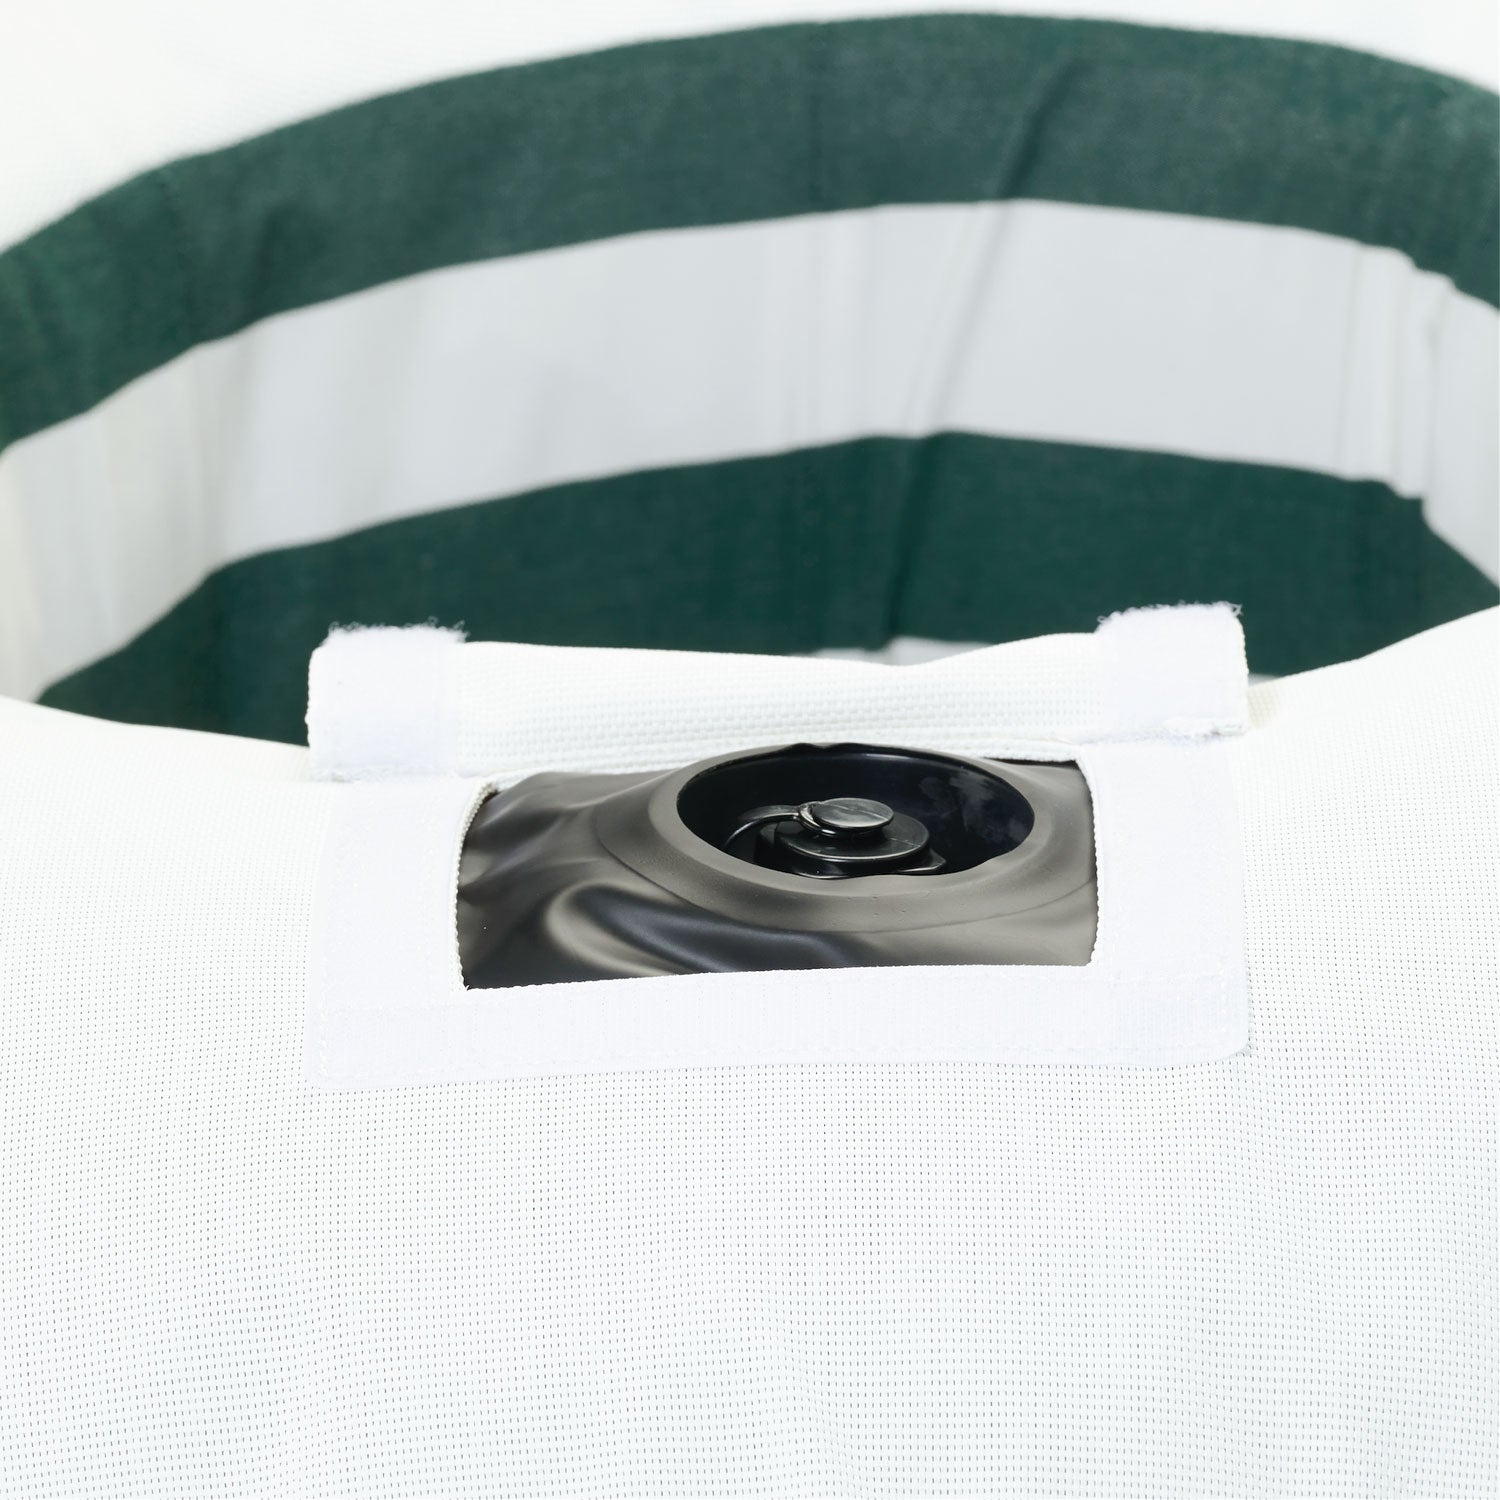 A ring luxury lilo in green and white stripe upside down displaying the base and velcro window to access the boston valve.